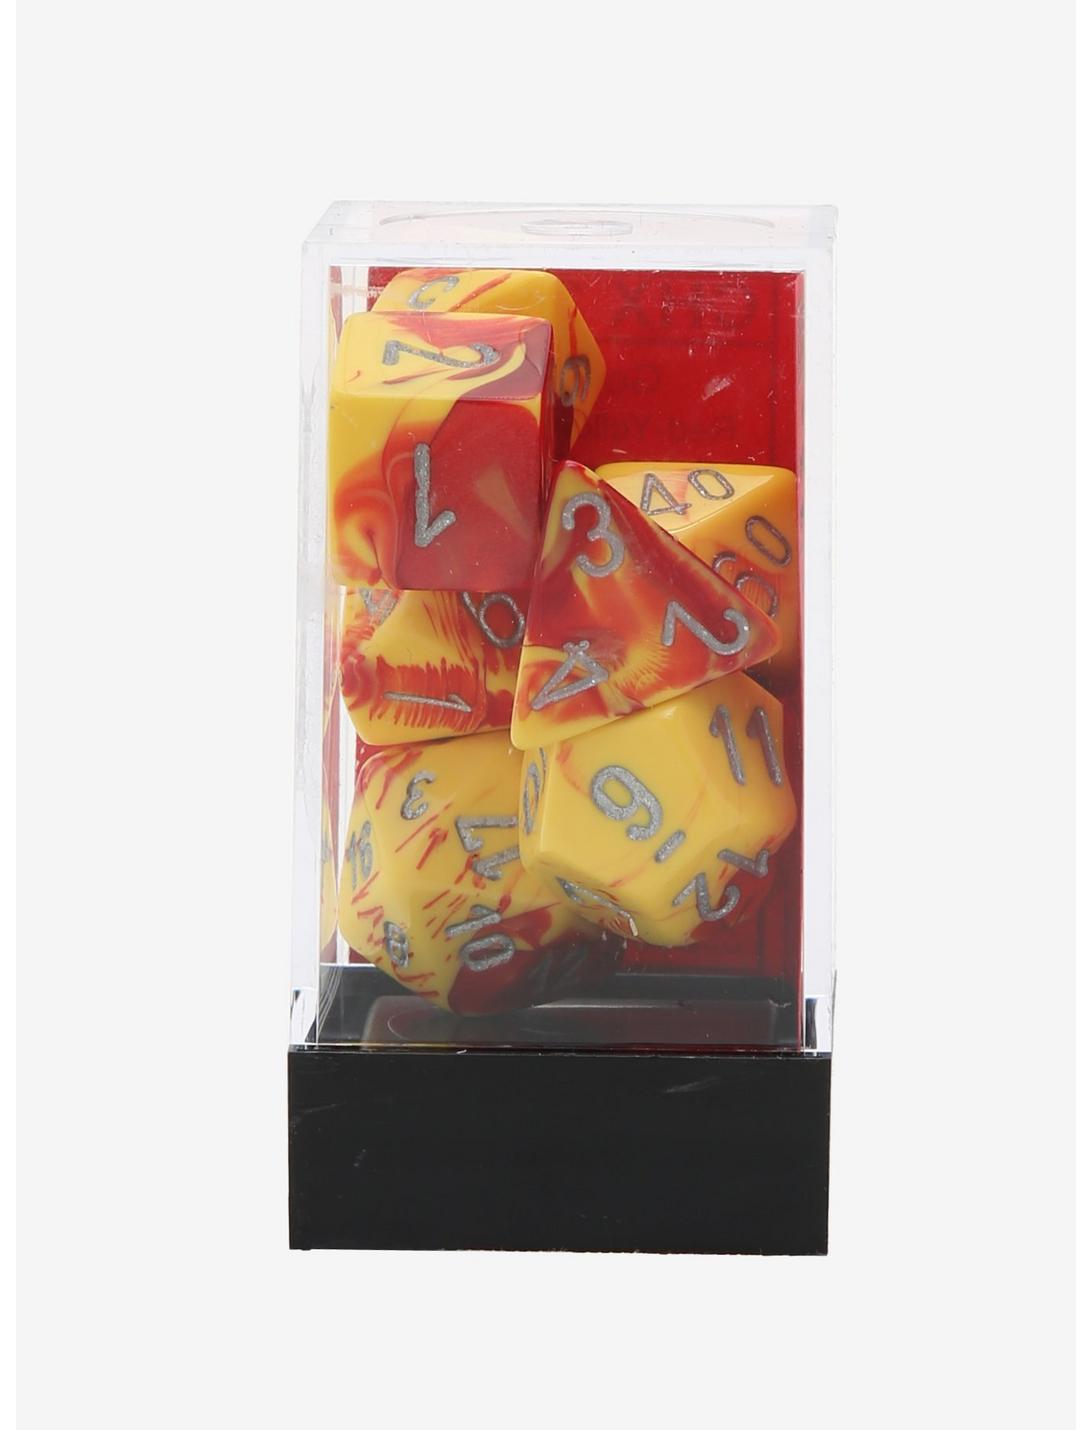 Chessex Gemini Red & Yellow With Silver Polyhedral Dice Set, , hi-res